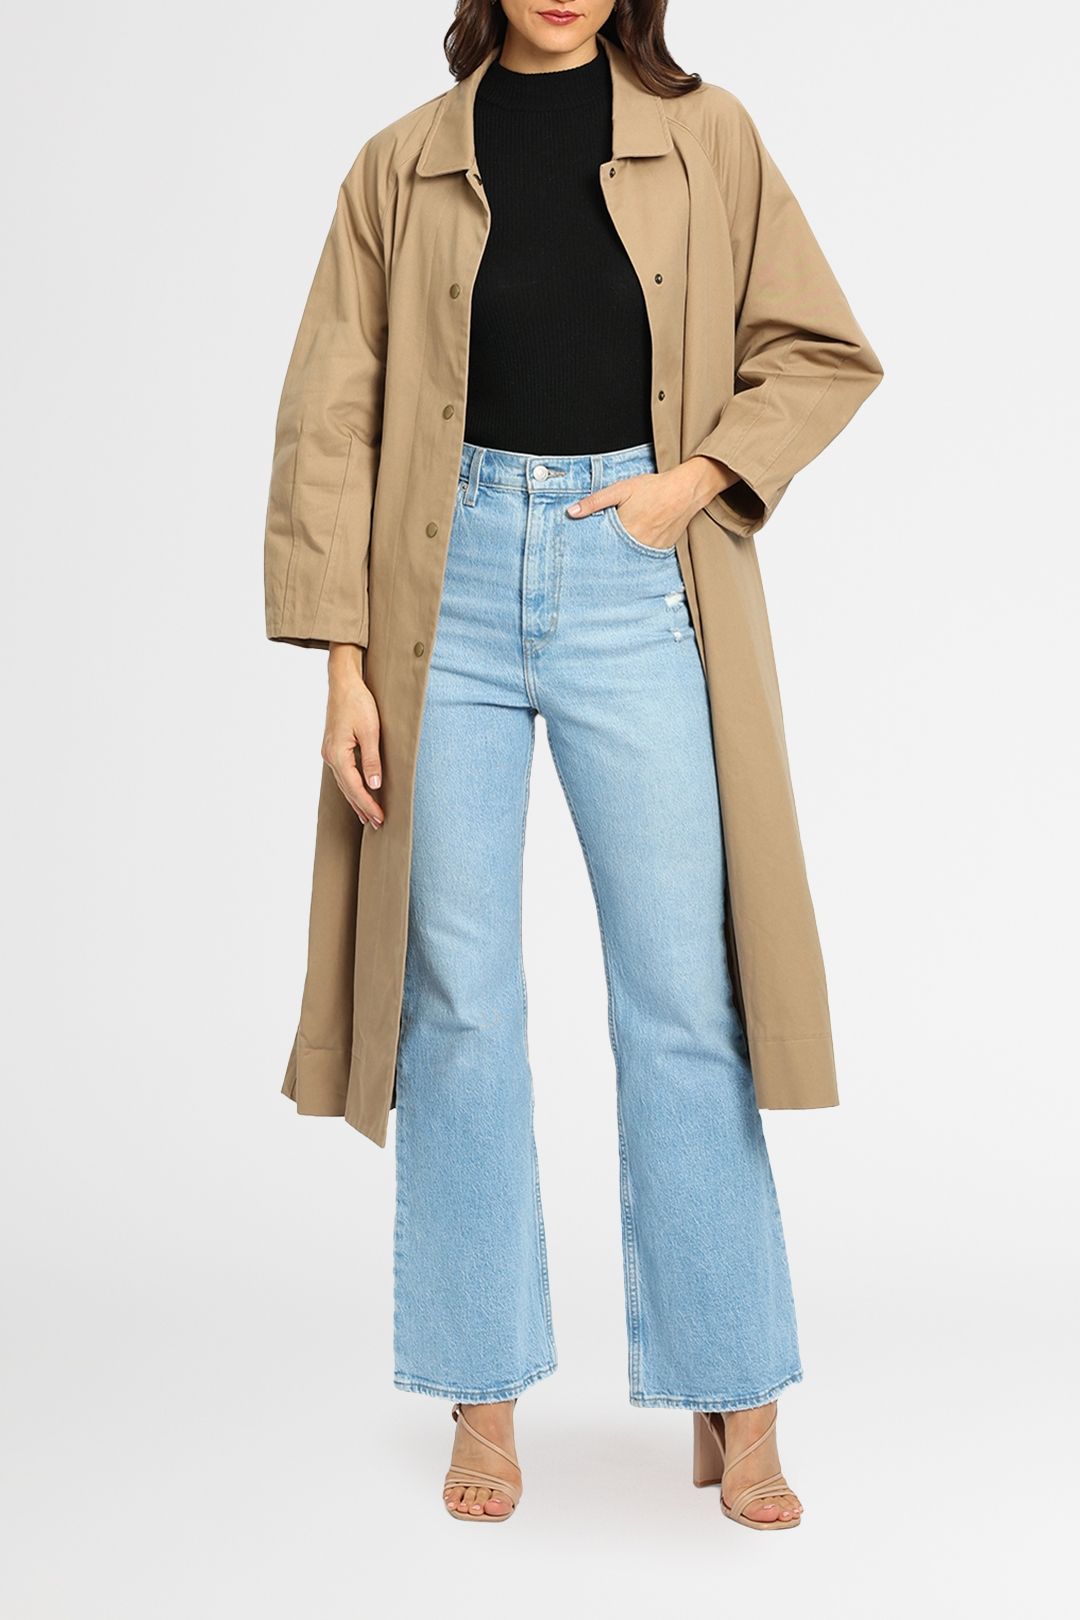 Marle Cali Trench